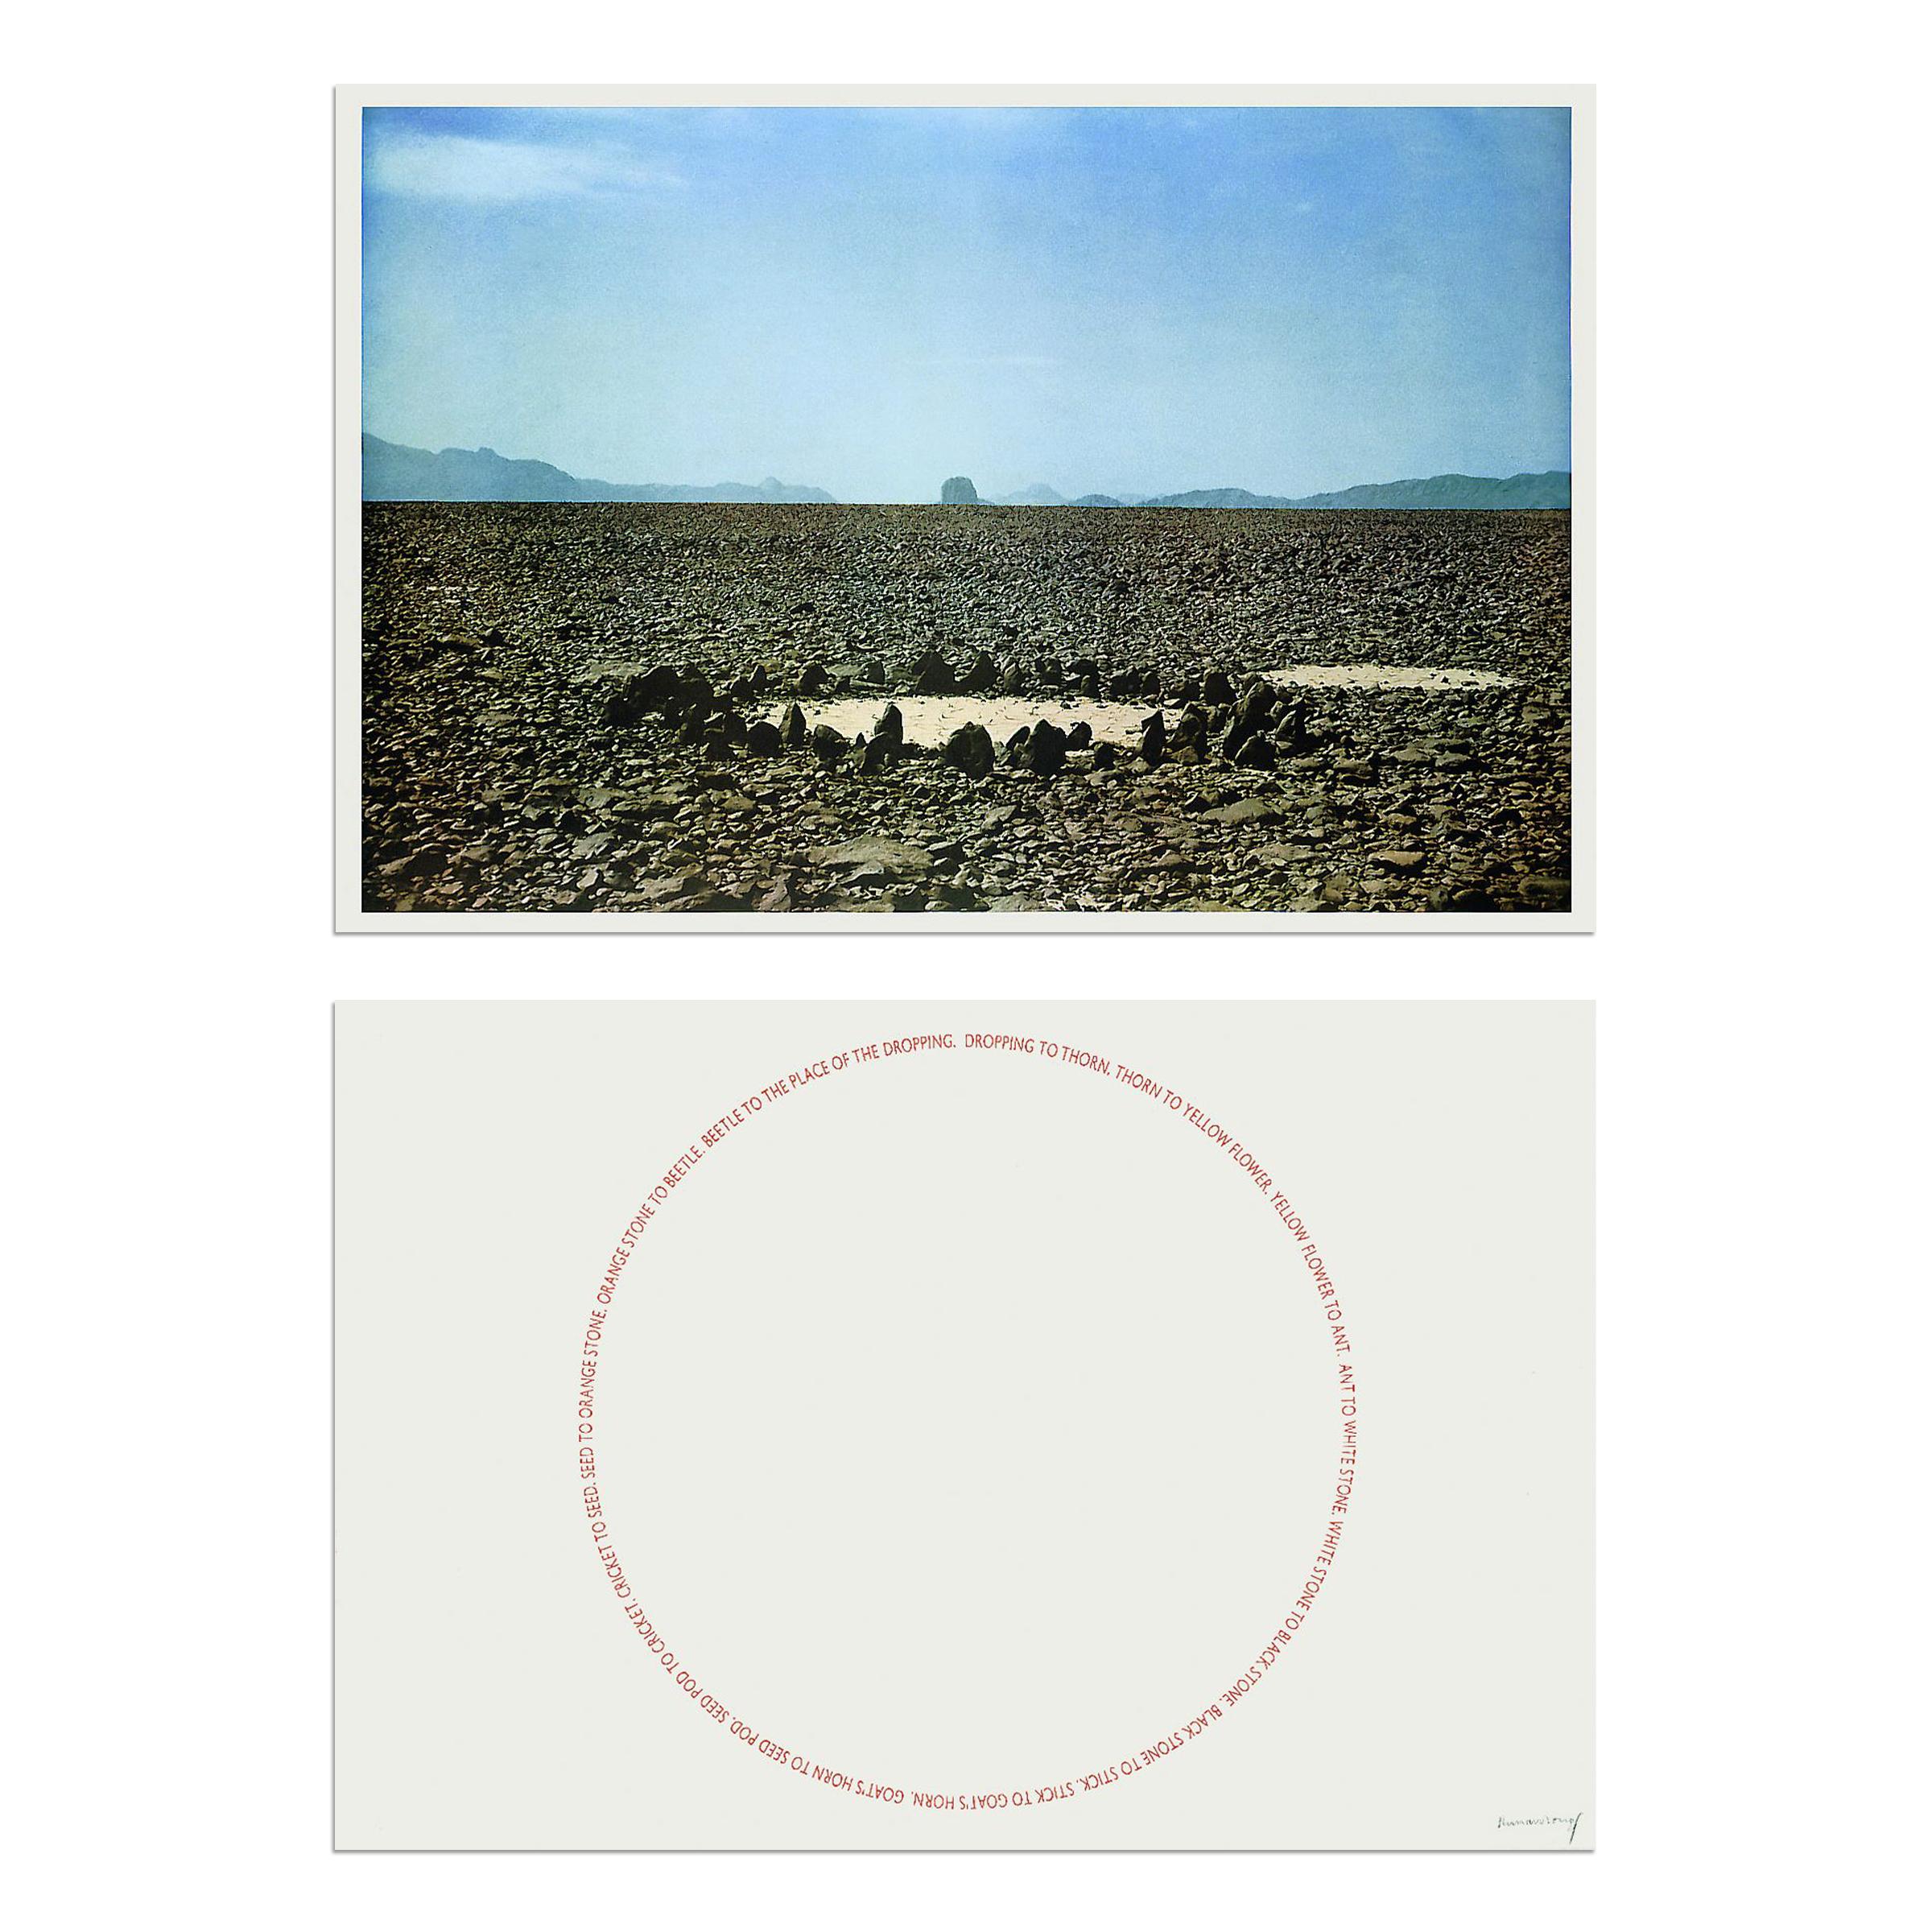 Richard Long (British, b. 1945)
Two Sahara Works, 1988
Medium: Set of 1 grano lithograph and 1 silkscreen, on rag paper
Dimensions: each 63 x 93 cm (24¾ x 36½ in)
Edition of 75: each hand-signed and numbered
Condition: Excellent